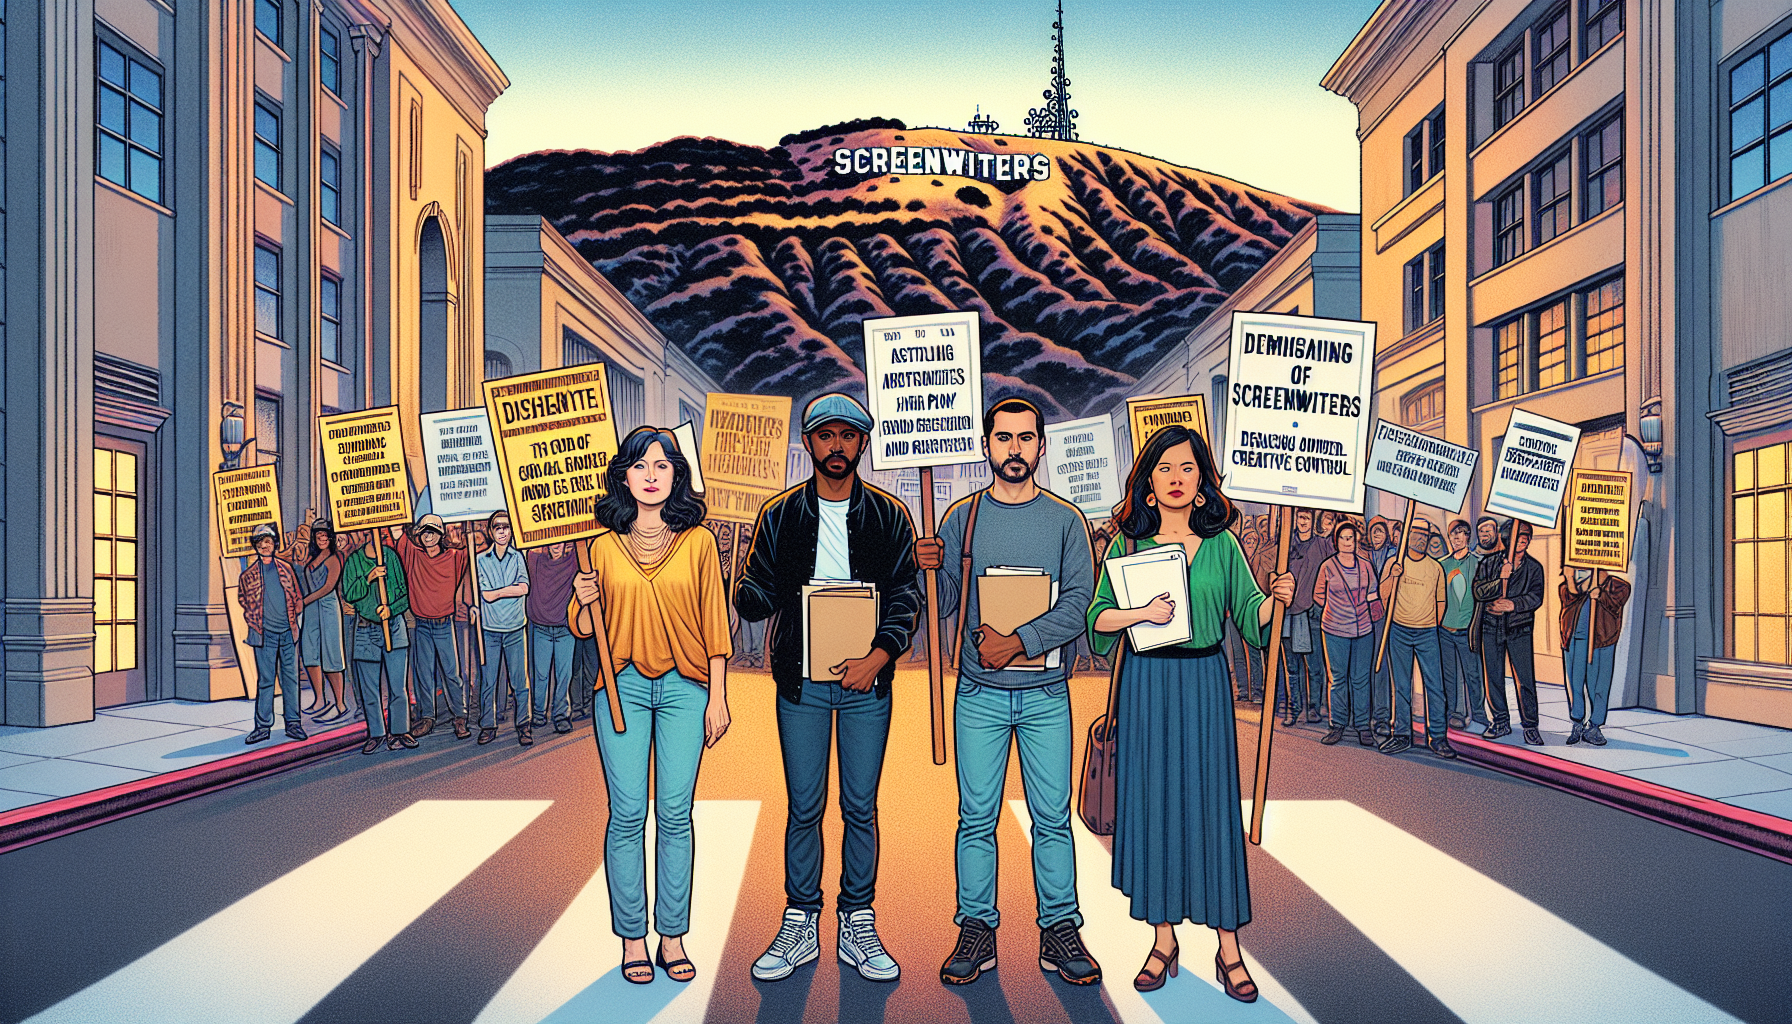 An illustrative scene showing a diverse group of screenwriters holding picket signs in front of a large film studio entrance, with banners displaying demands for fair pay and creative control, set aga